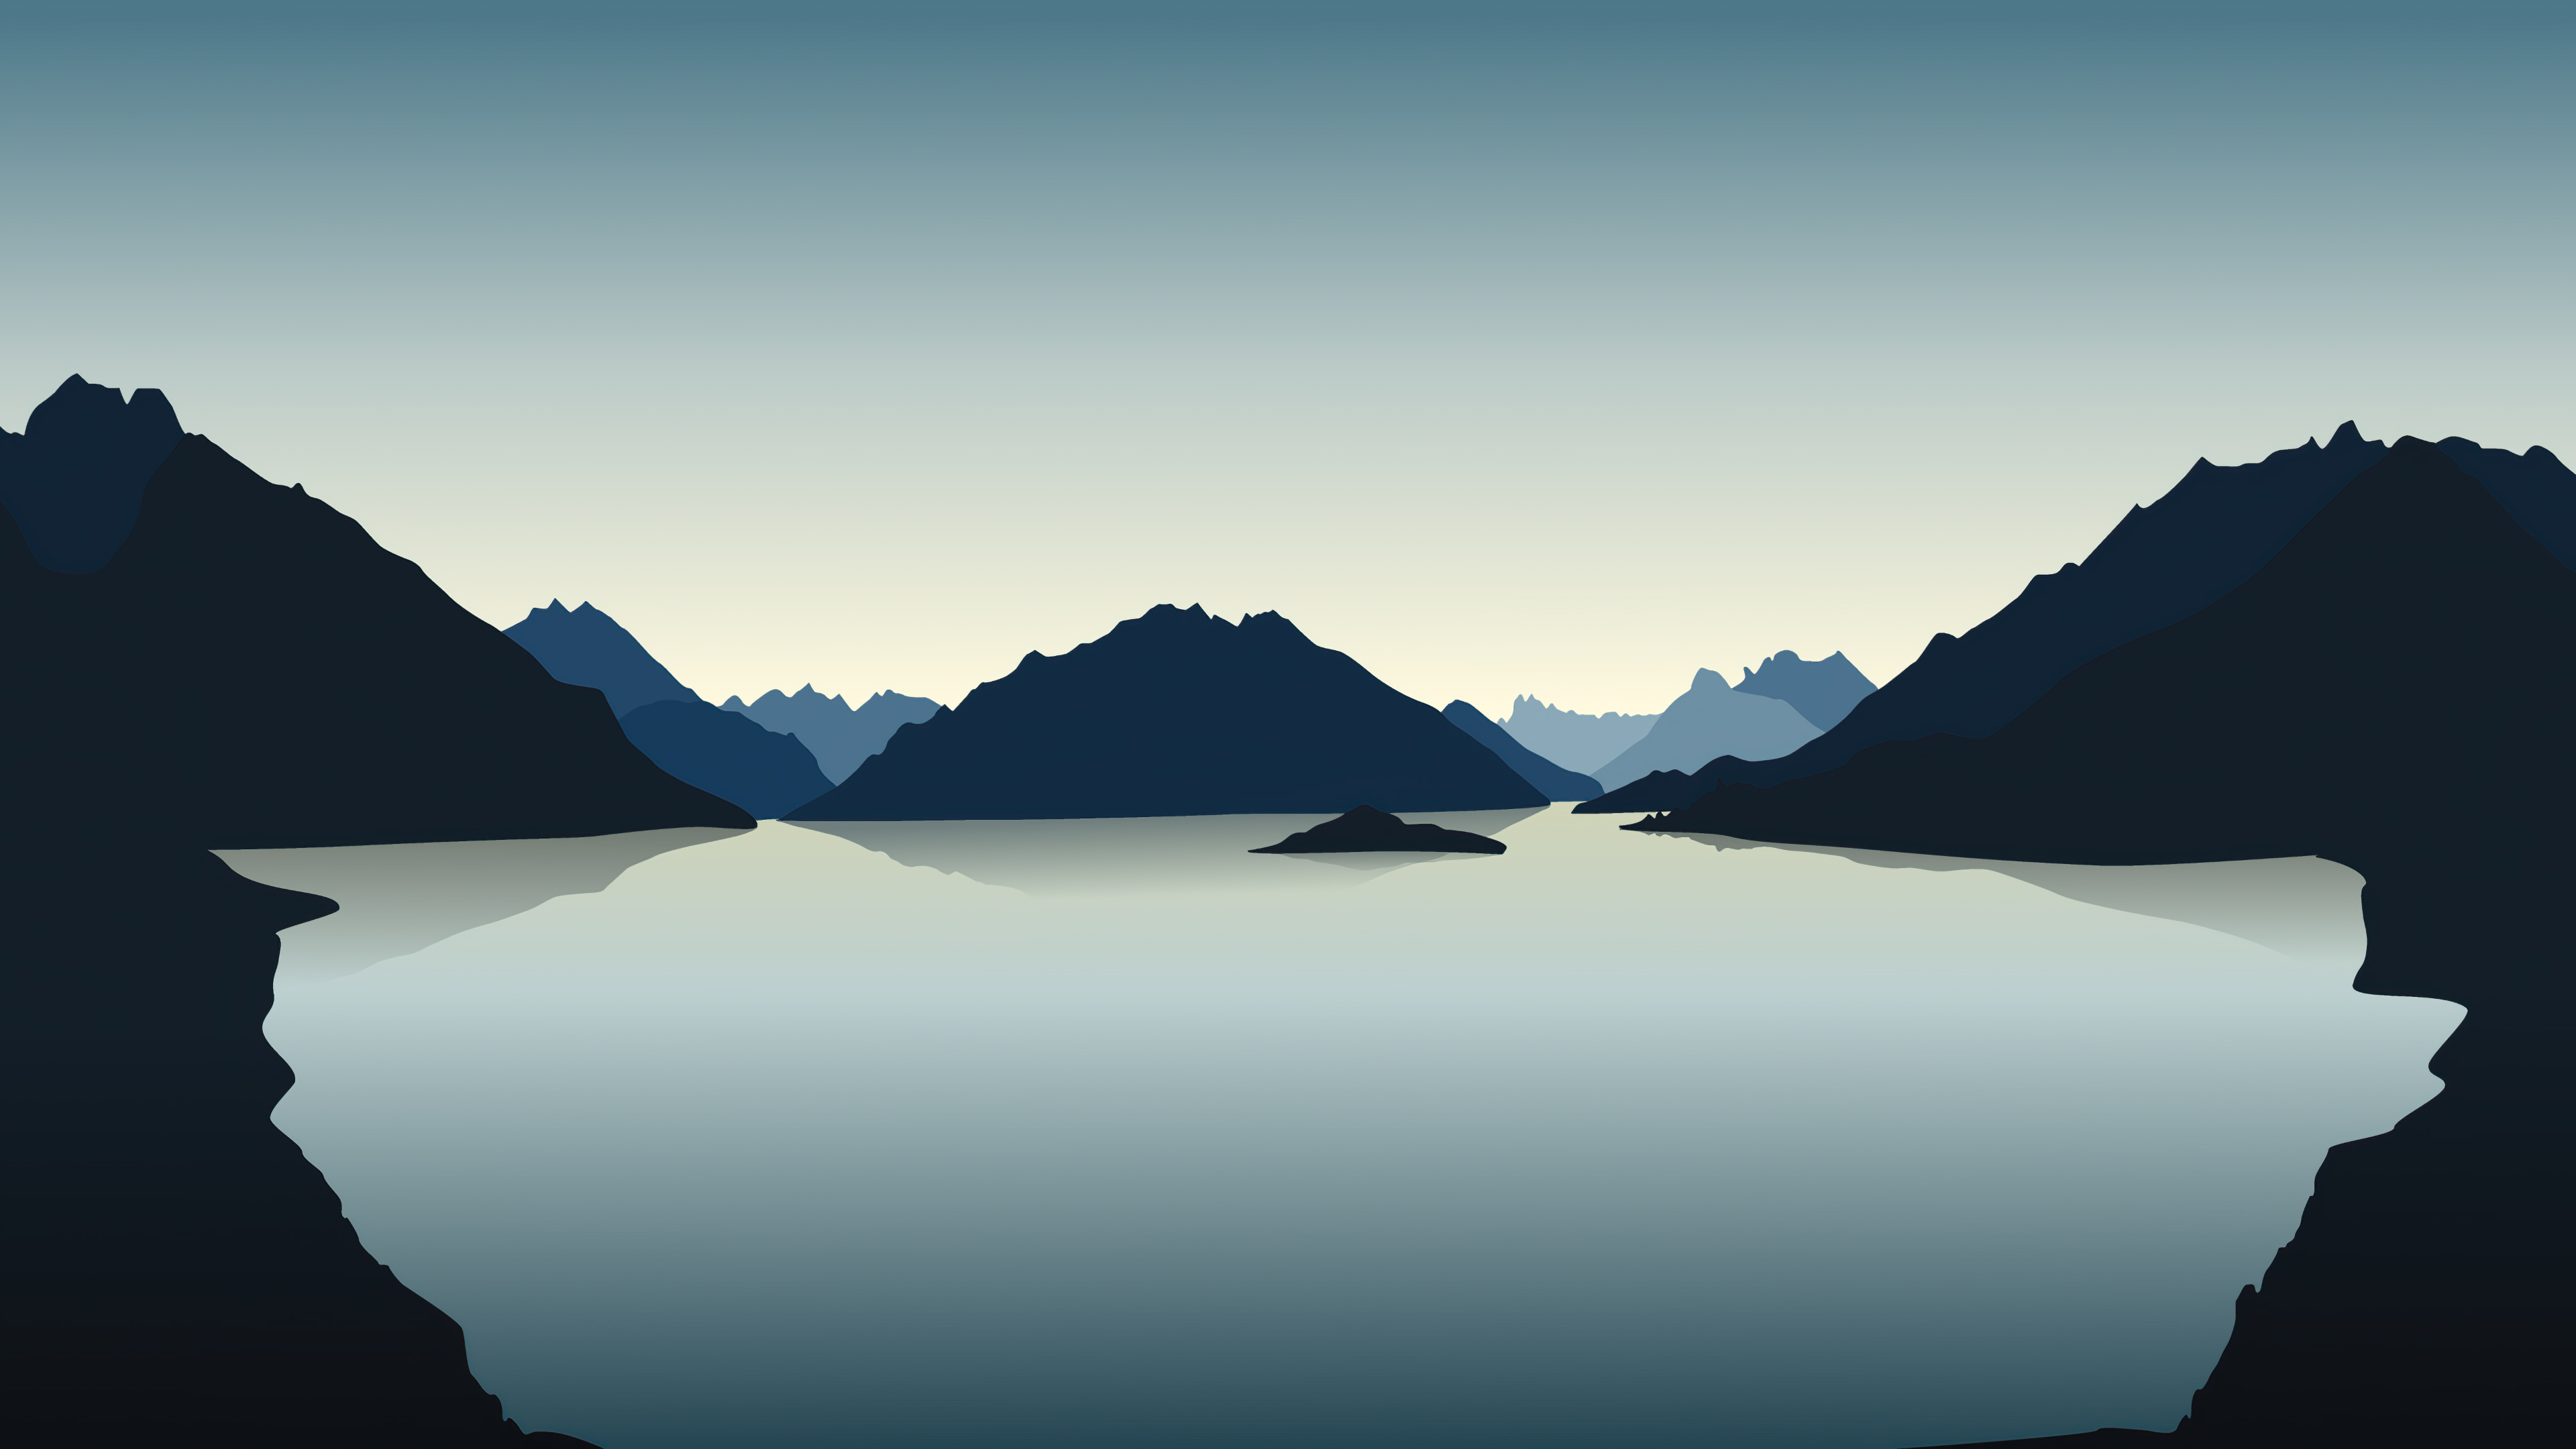 Wallpapers reflection landscape mountains on the desktop